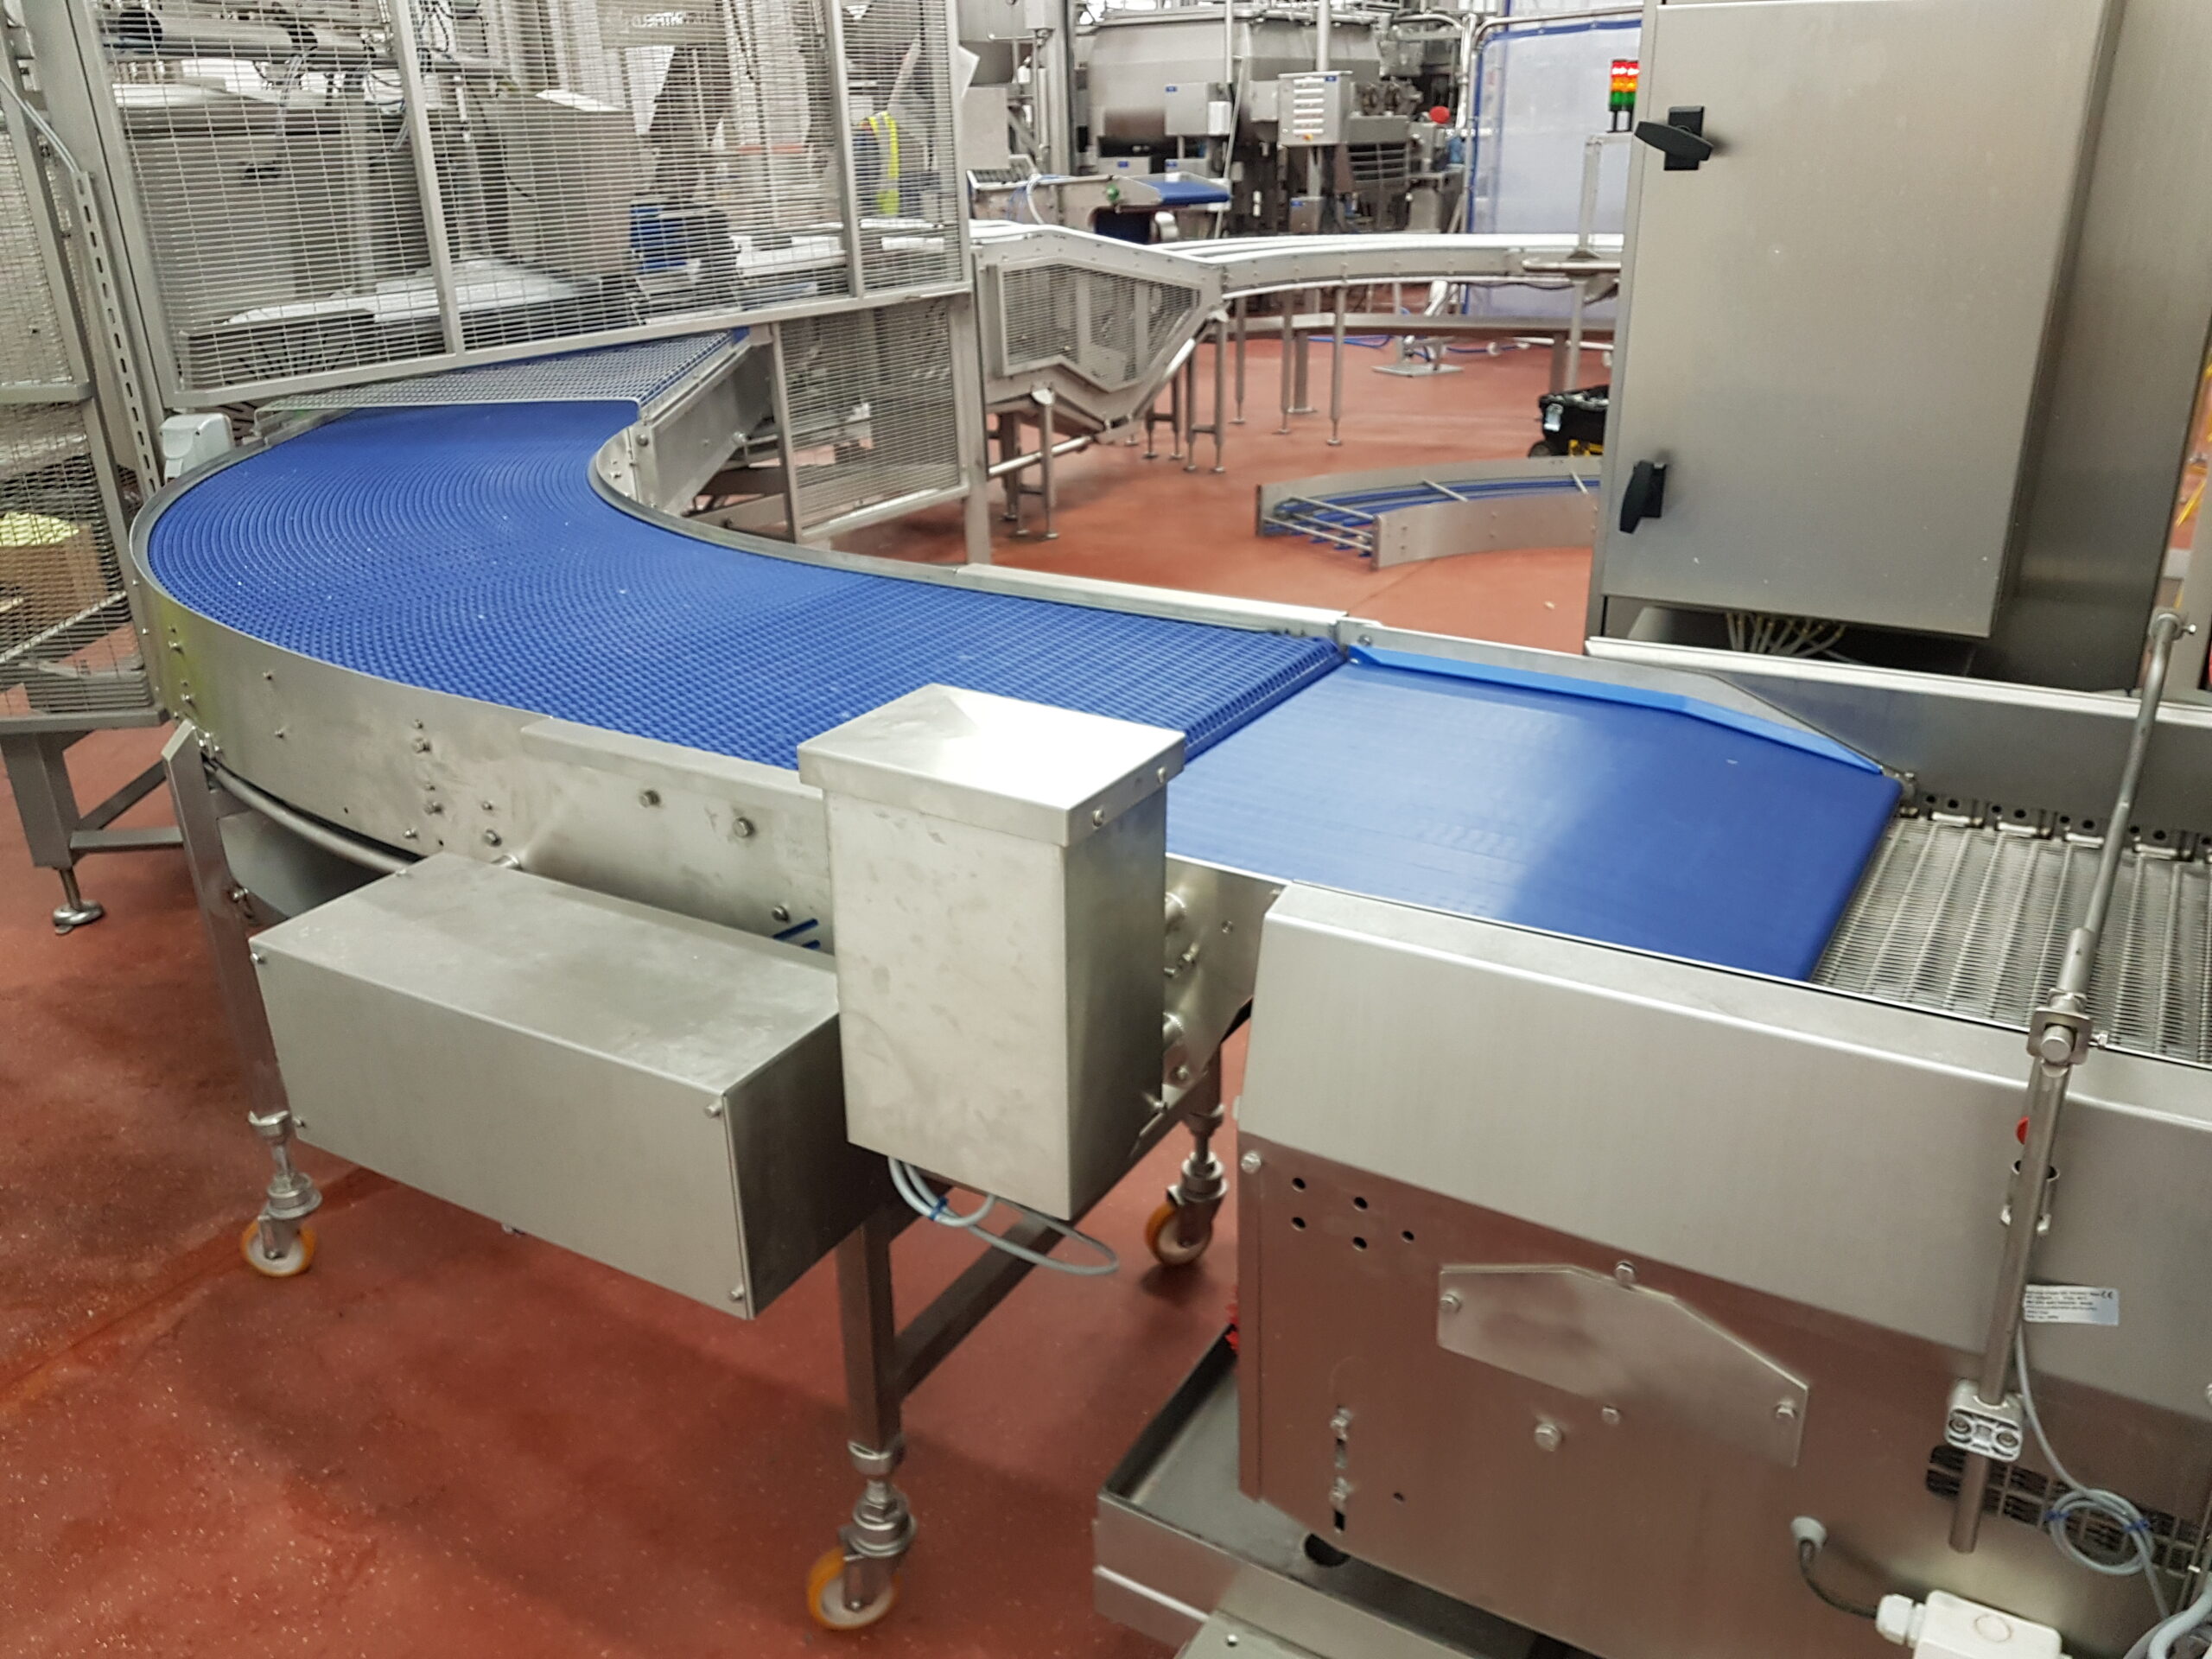 Radius conveyor with transfer belt with tight nose transfer and underslung drive freezer in feed Wrightfield